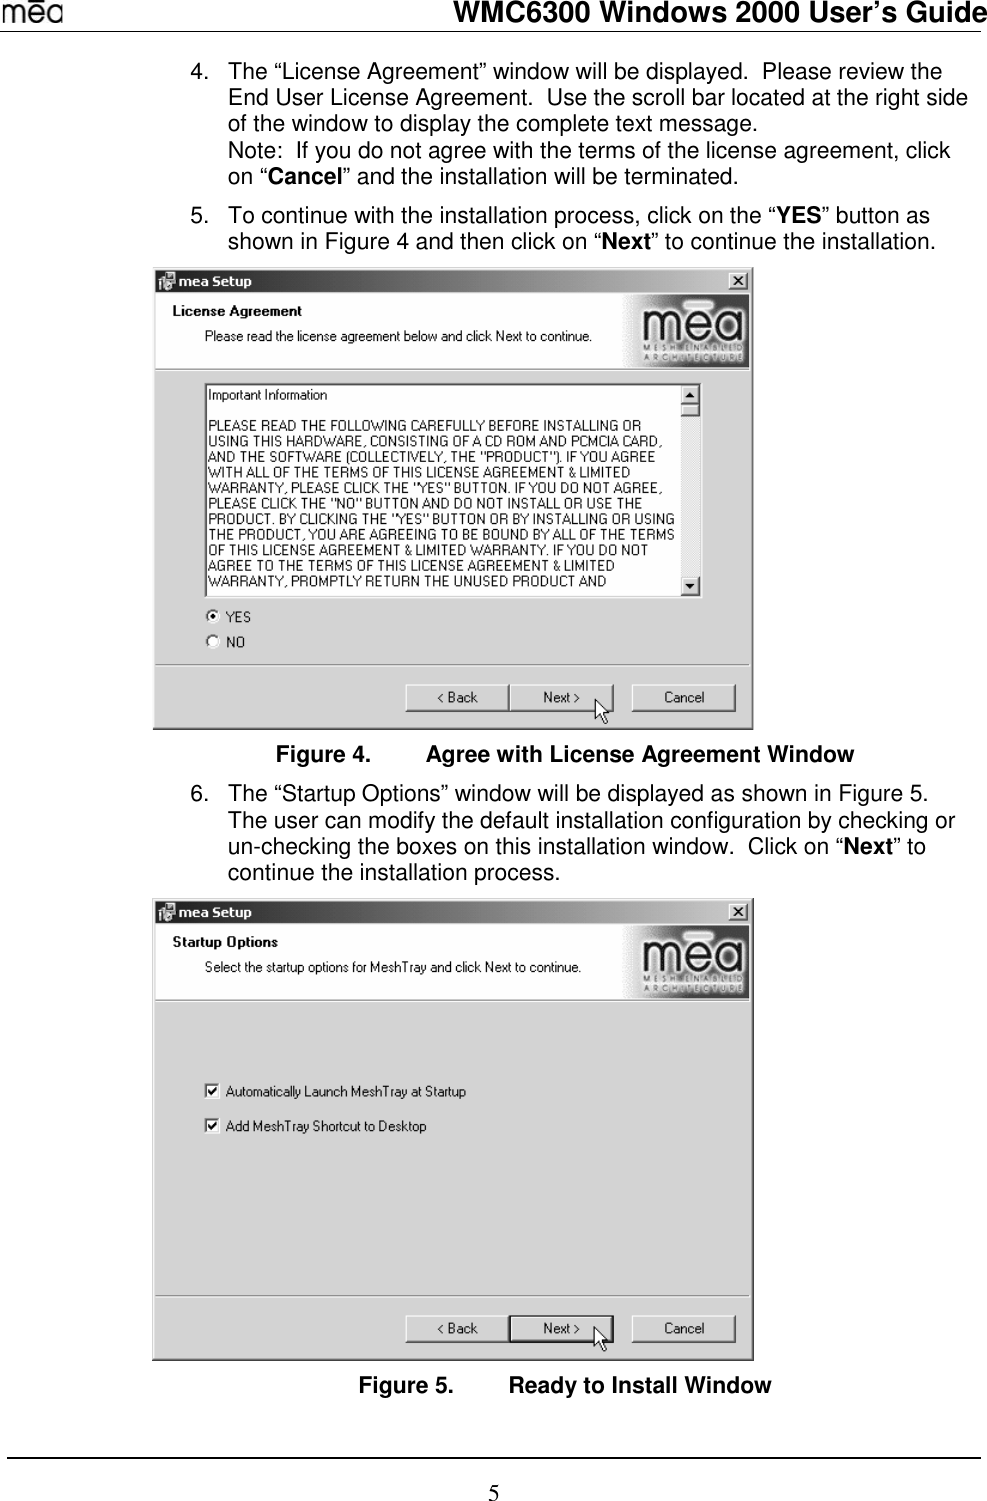   WMC6300 Windows 2000 User’s Guide 5 4.  The “License Agreement” window will be displayed.  Please review the End User License Agreement.  Use the scroll bar located at the right side of the window to display the complete text message.   Note:  If you do not agree with the terms of the license agreement, click on “Cancel” and the installation will be terminated. 5.  To continue with the installation process, click on the “YES” button as shown in Figure 4 and then click on “Next” to continue the installation.    Figure 4.  Agree with License Agreement Window 6.  The “Startup Options” window will be displayed as shown in Figure 5.  The user can modify the default installation configuration by checking or un-checking the boxes on this installation window.  Click on “Next” to continue the installation process.   Figure 5.  Ready to Install Window 